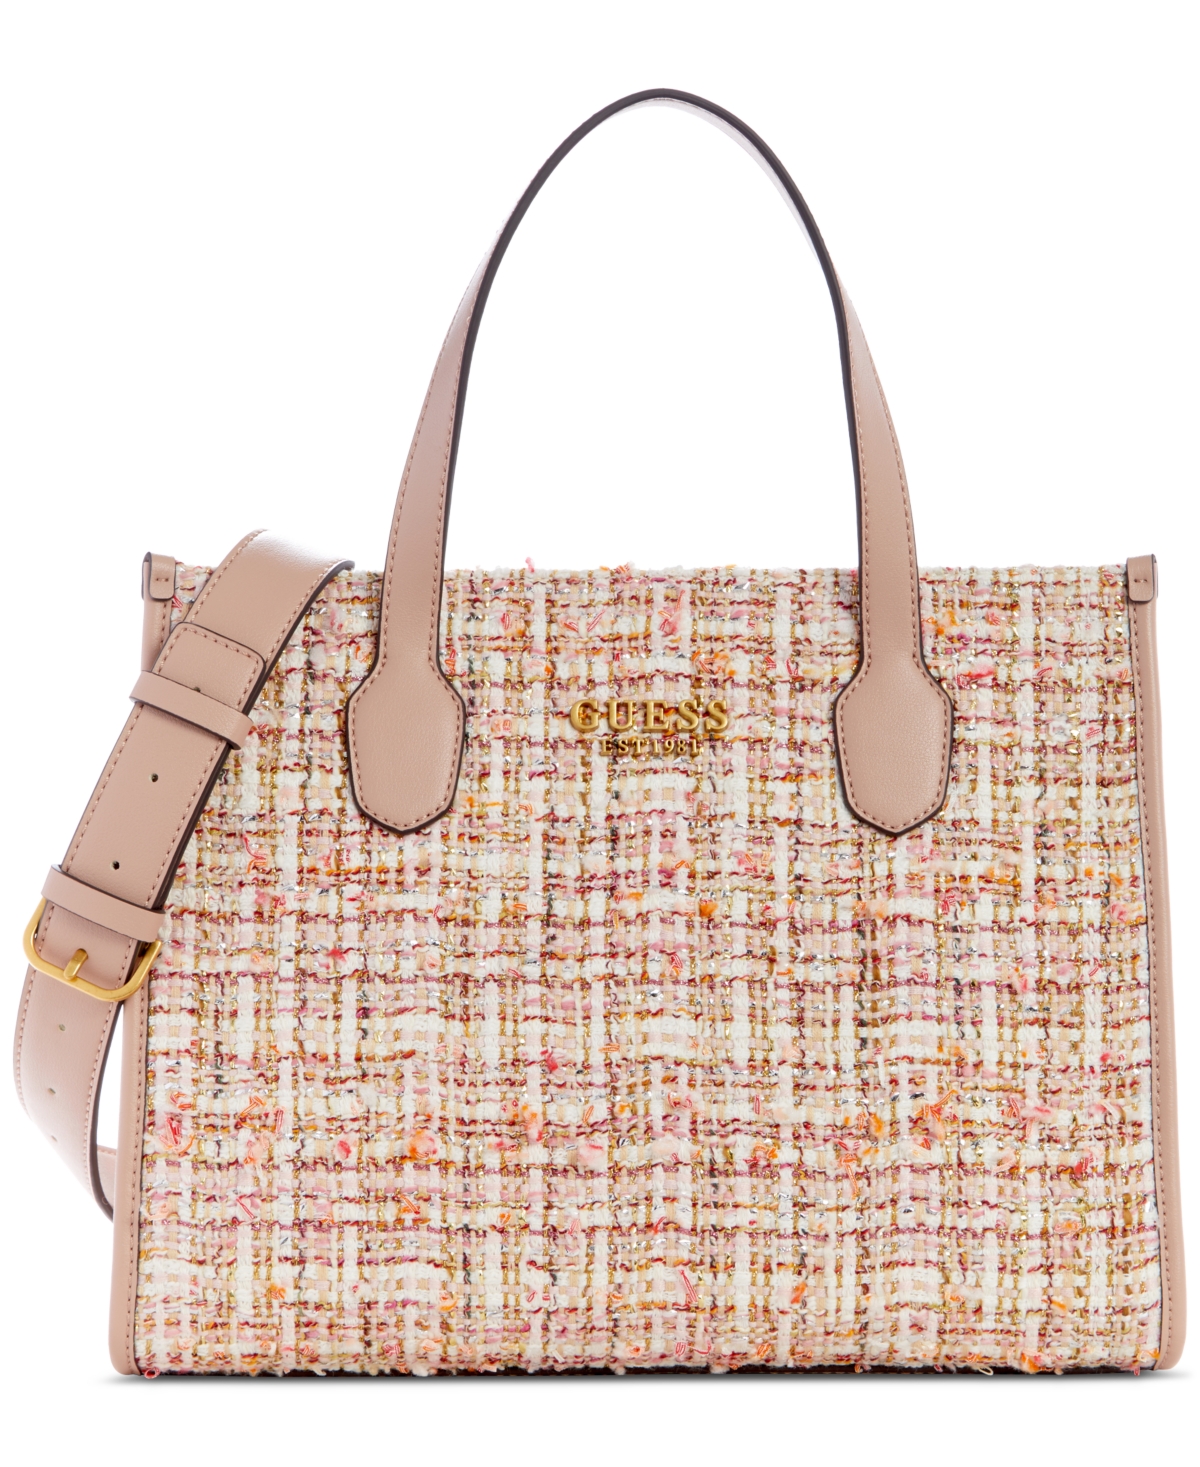 GUESS SILVANA TWEED DOUBLE COMPARTMENT MEDIUM TOTE